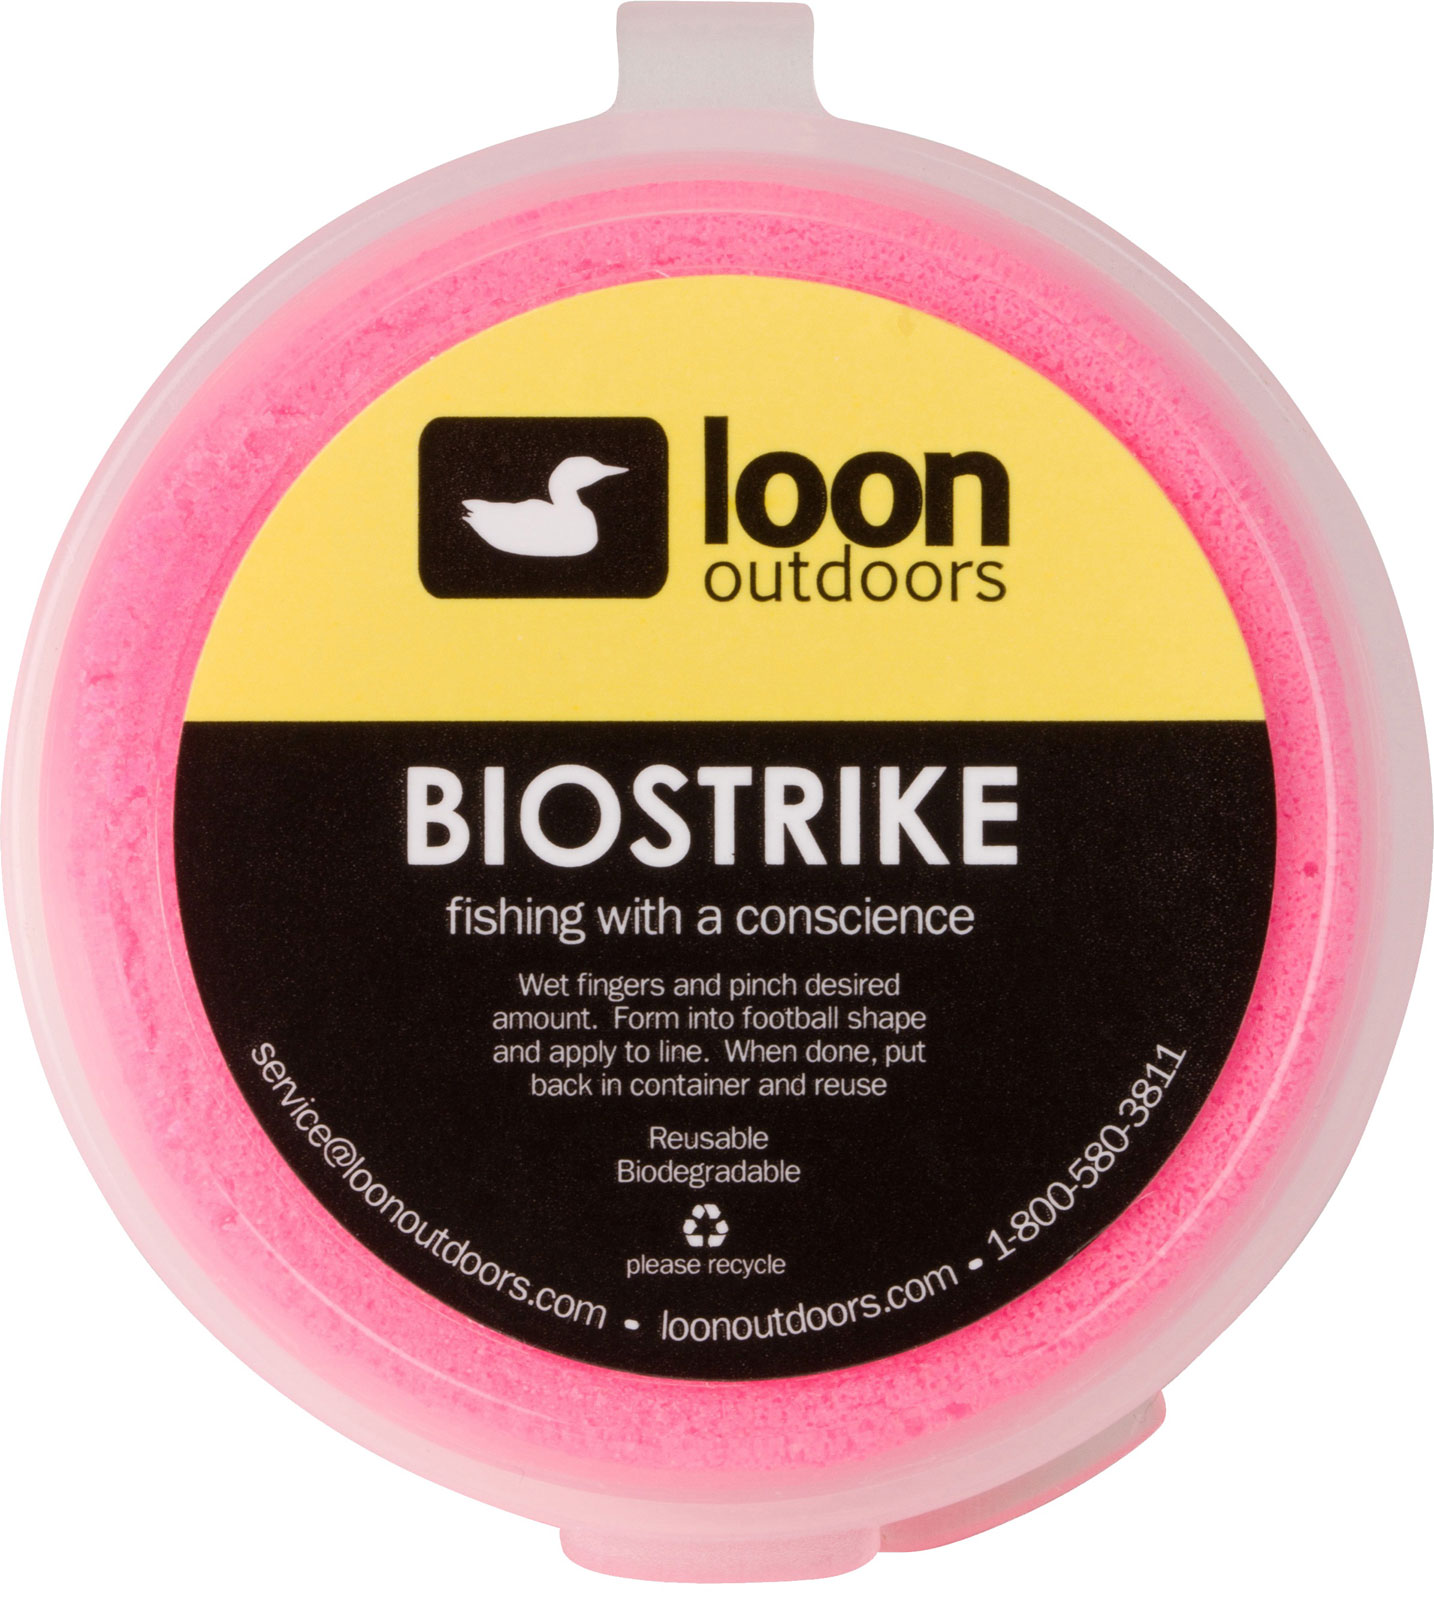 Loon Outdoors Biostrike Putty Strike Indicator Fly Fishing Reusable High Float - image 1 of 3